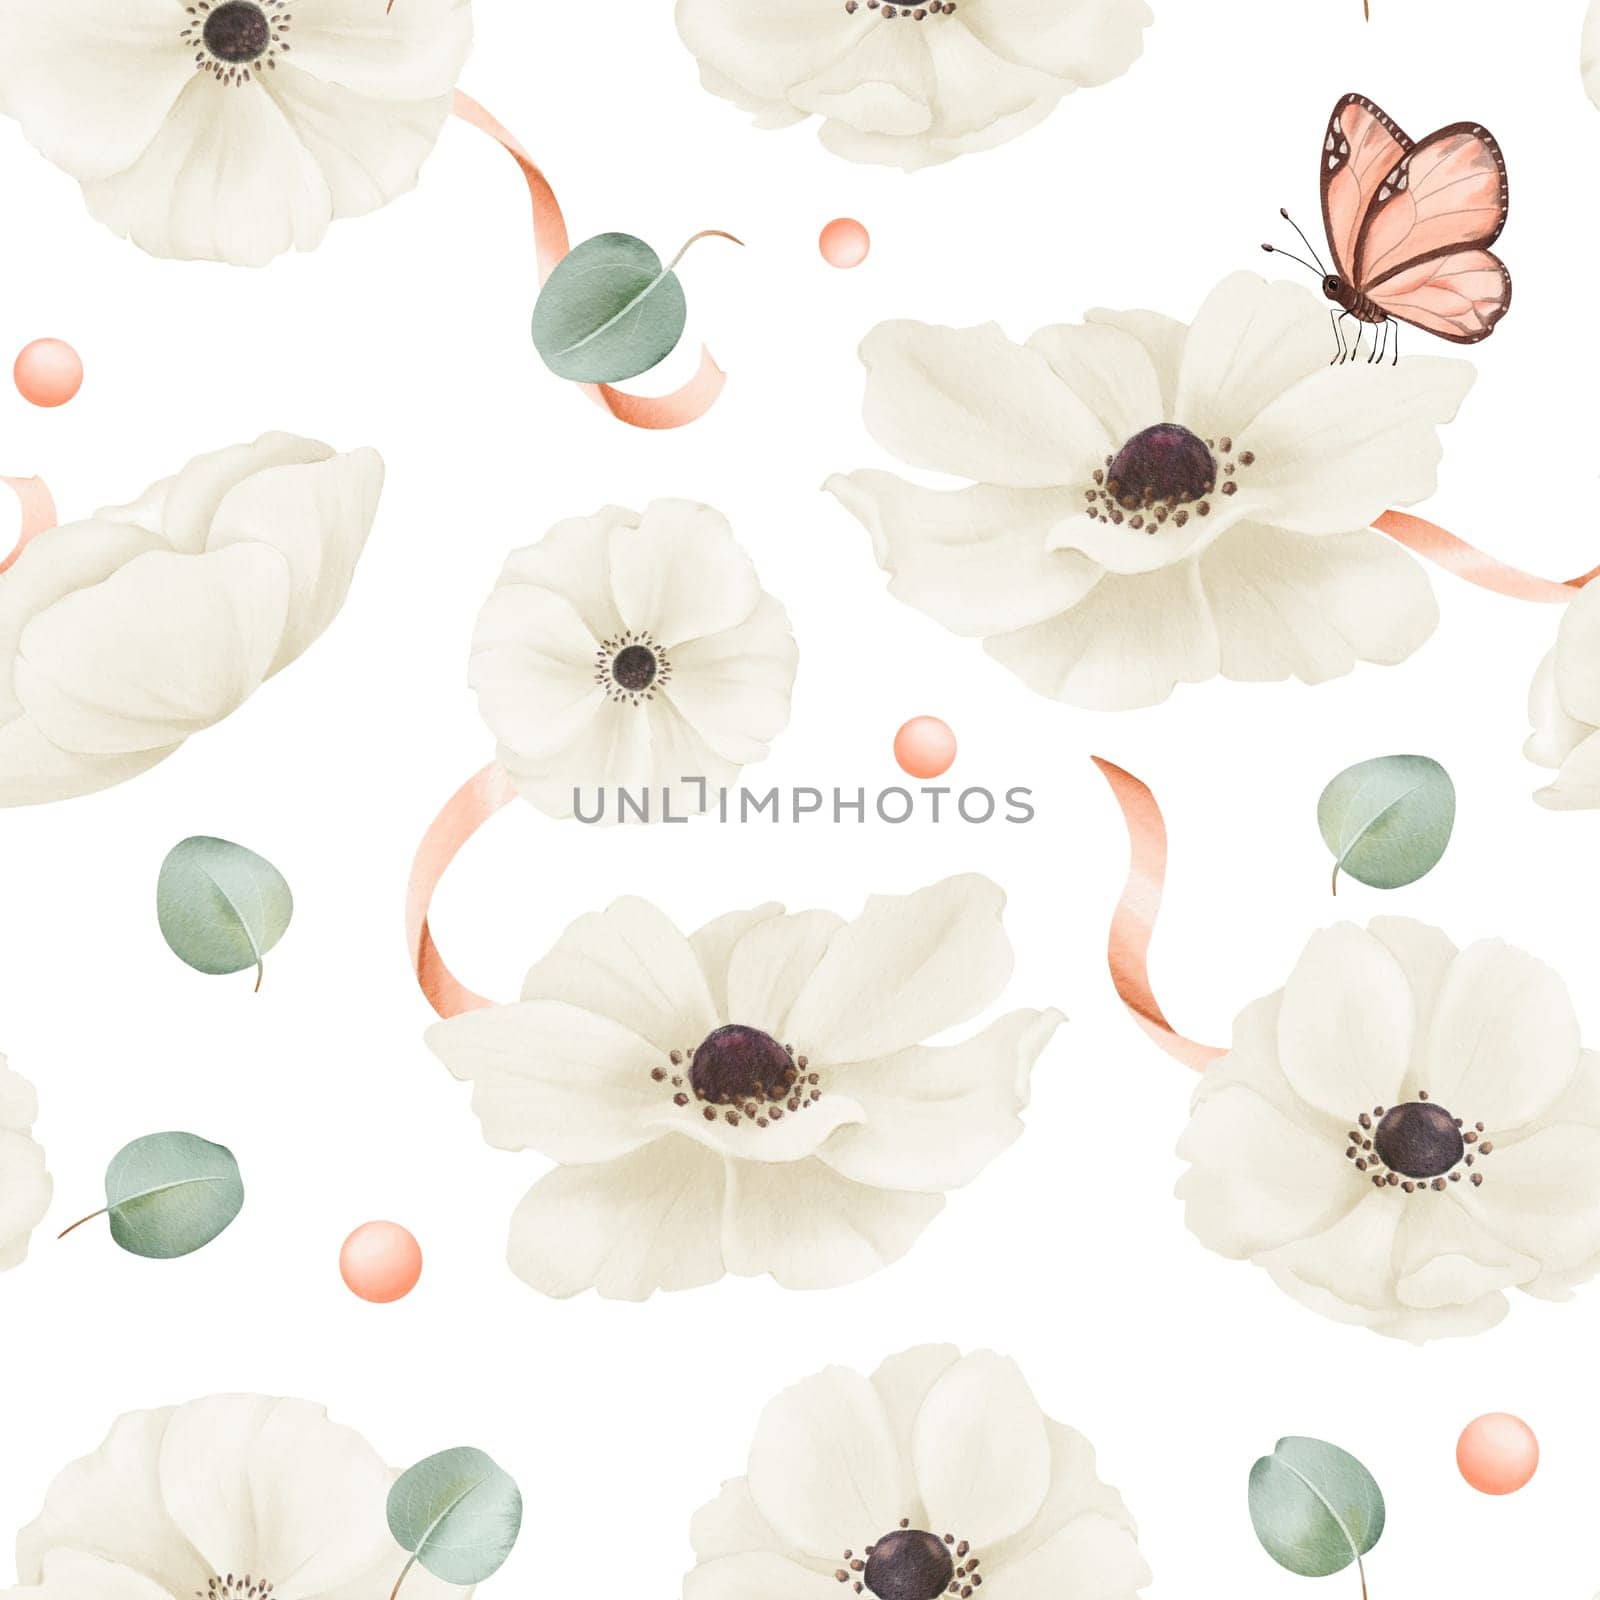 Seamless pattern featuring white watercolor anemones, eucalyptus leaves, satin ribbons, and rhinestones. textiles, web design, printed materials, greeting cards, wallpapers, gift packaging by Art_Mari_Ka